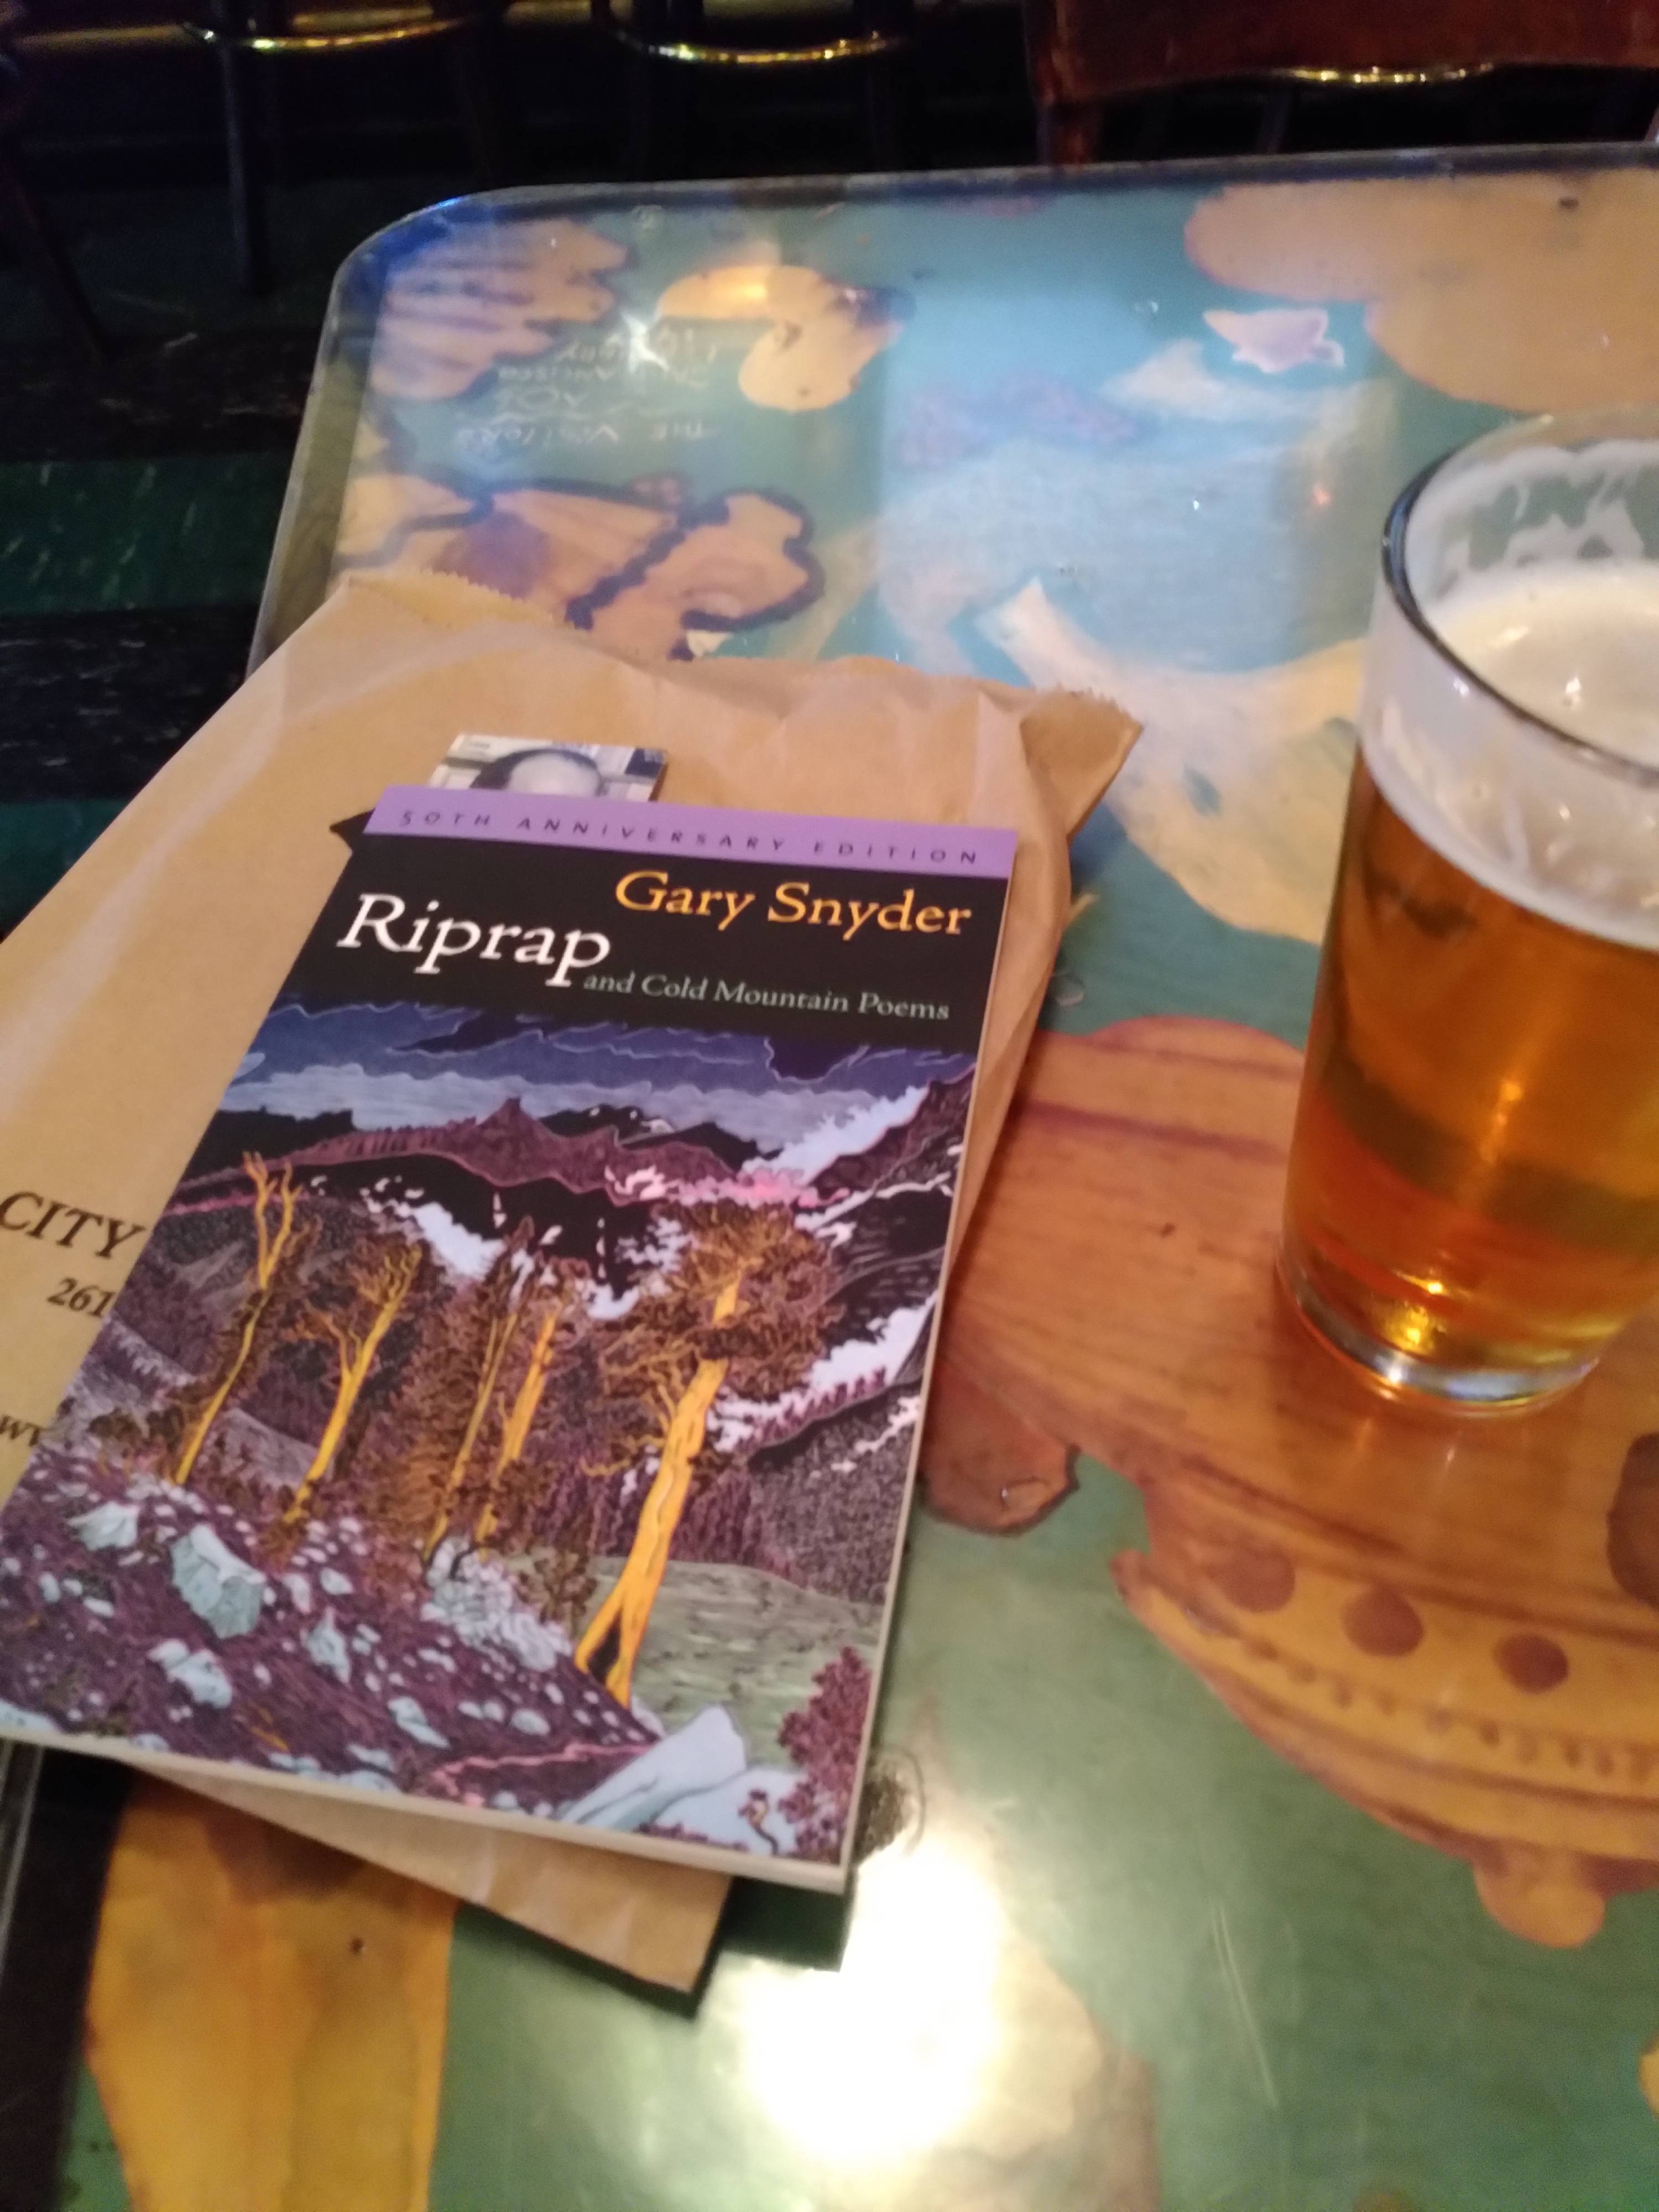 Gary Snyder's book "Riprap", which includes "Cold Mountain Poems" on a table with a glass of beer next to it.